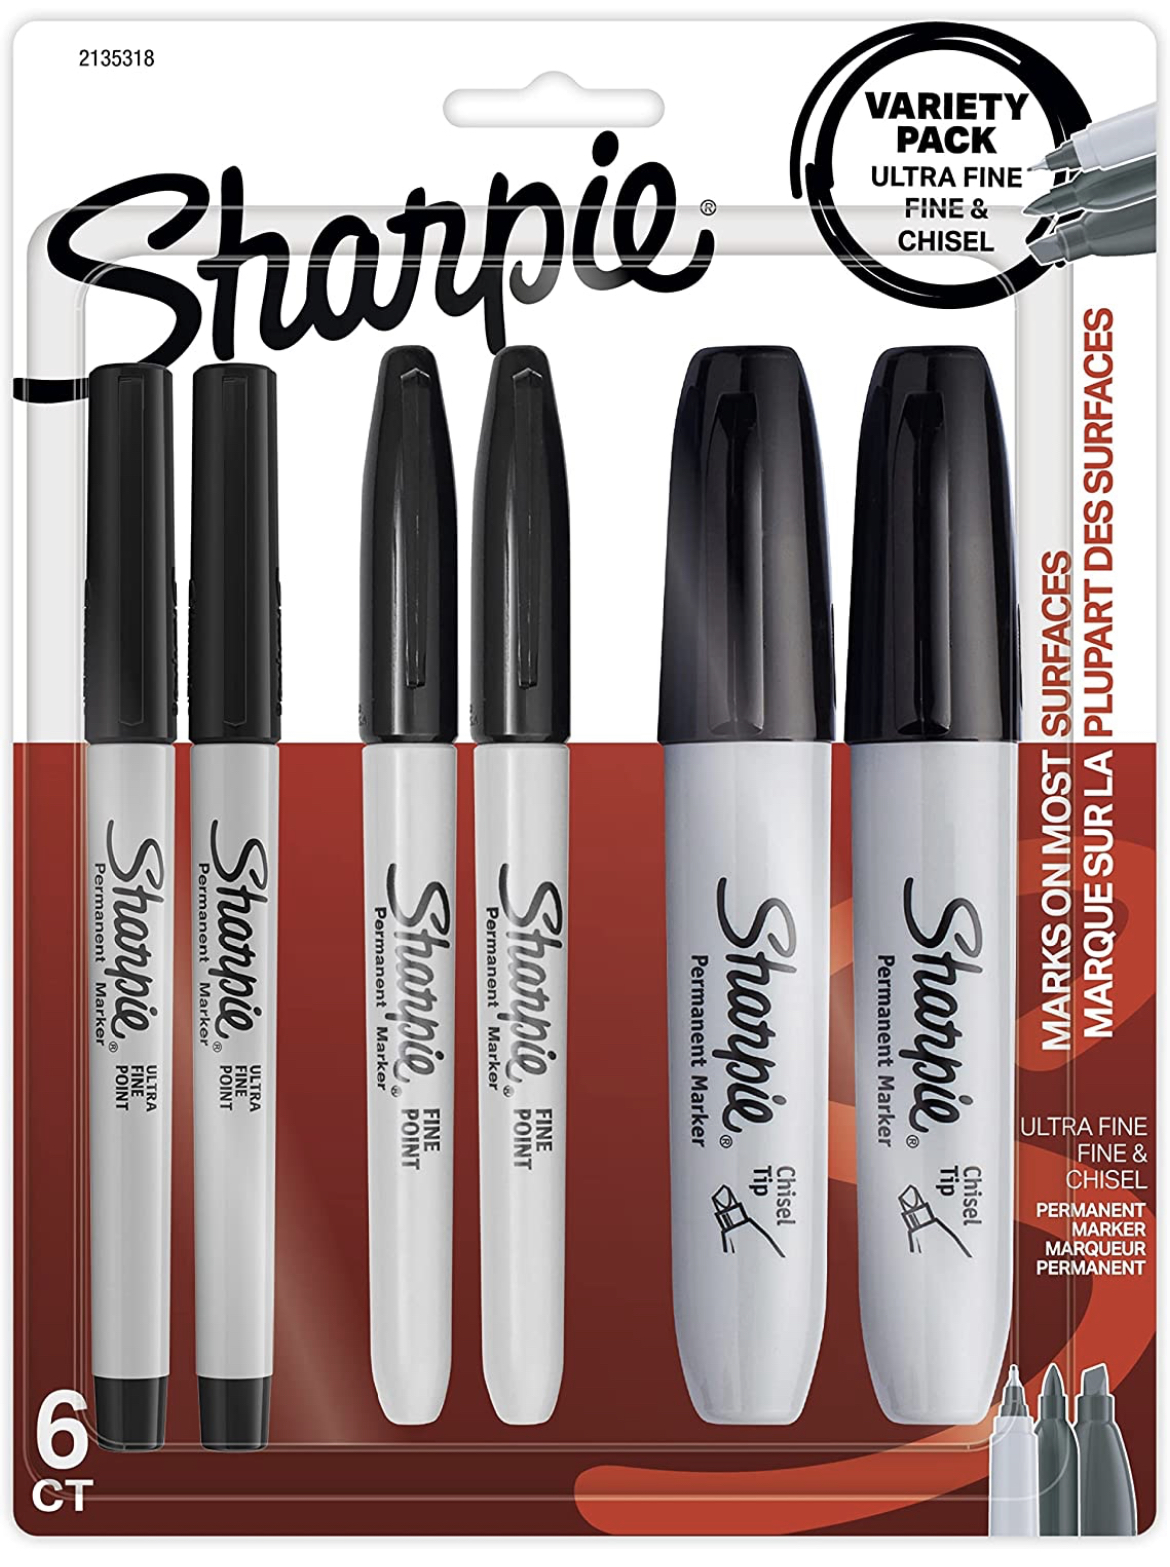 6-Count Sharpie Permanent Markers Variety Pack (Black, 2135318) $5.74